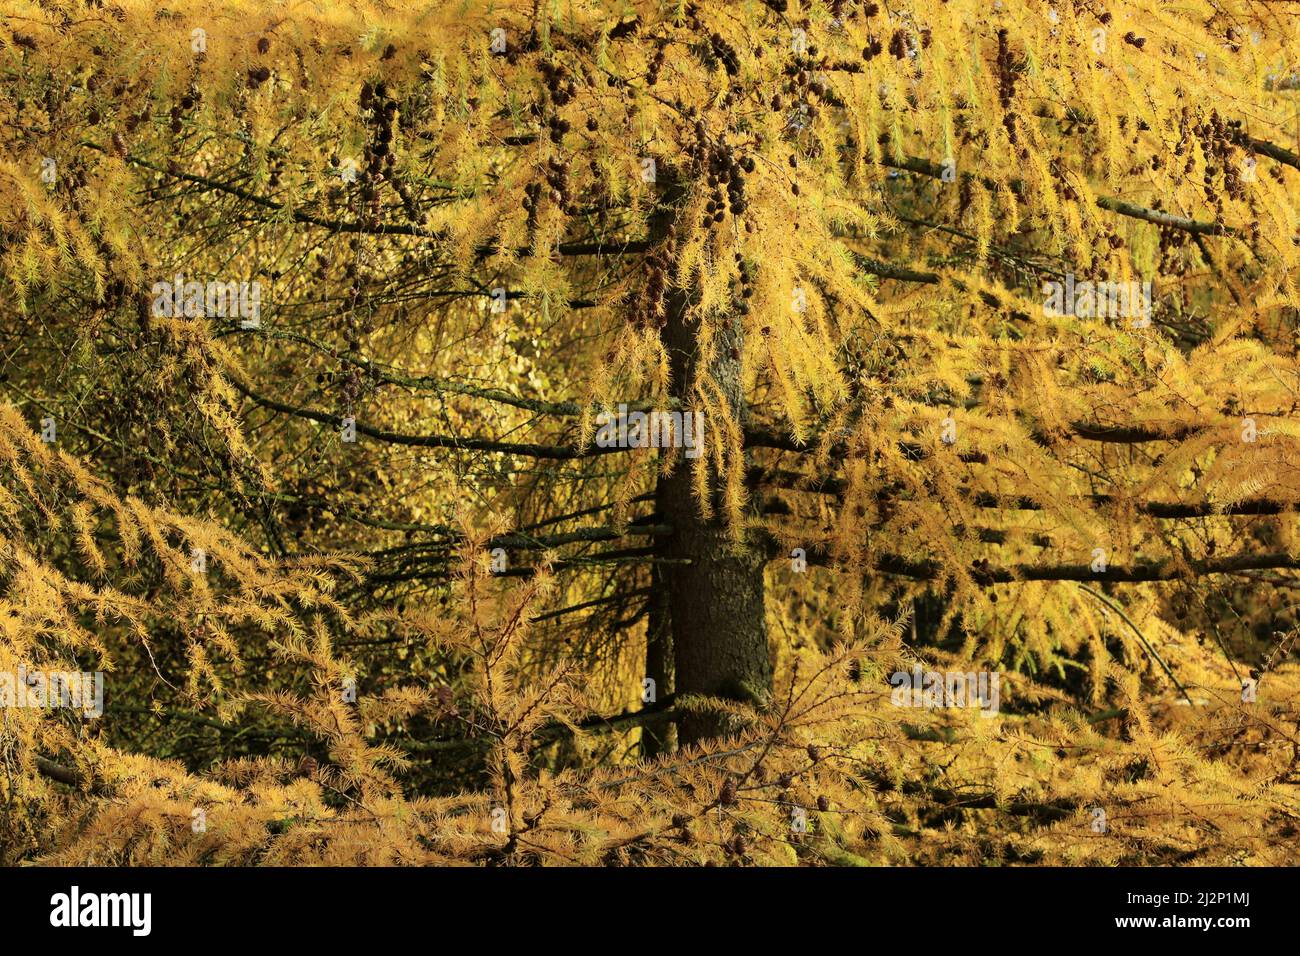 Close up of Larch tree, a deciduous conifer in the forest of Cannock Chase. Latin name is Larix occidentalis displays stunning golden foliage Autumn Stock Photo